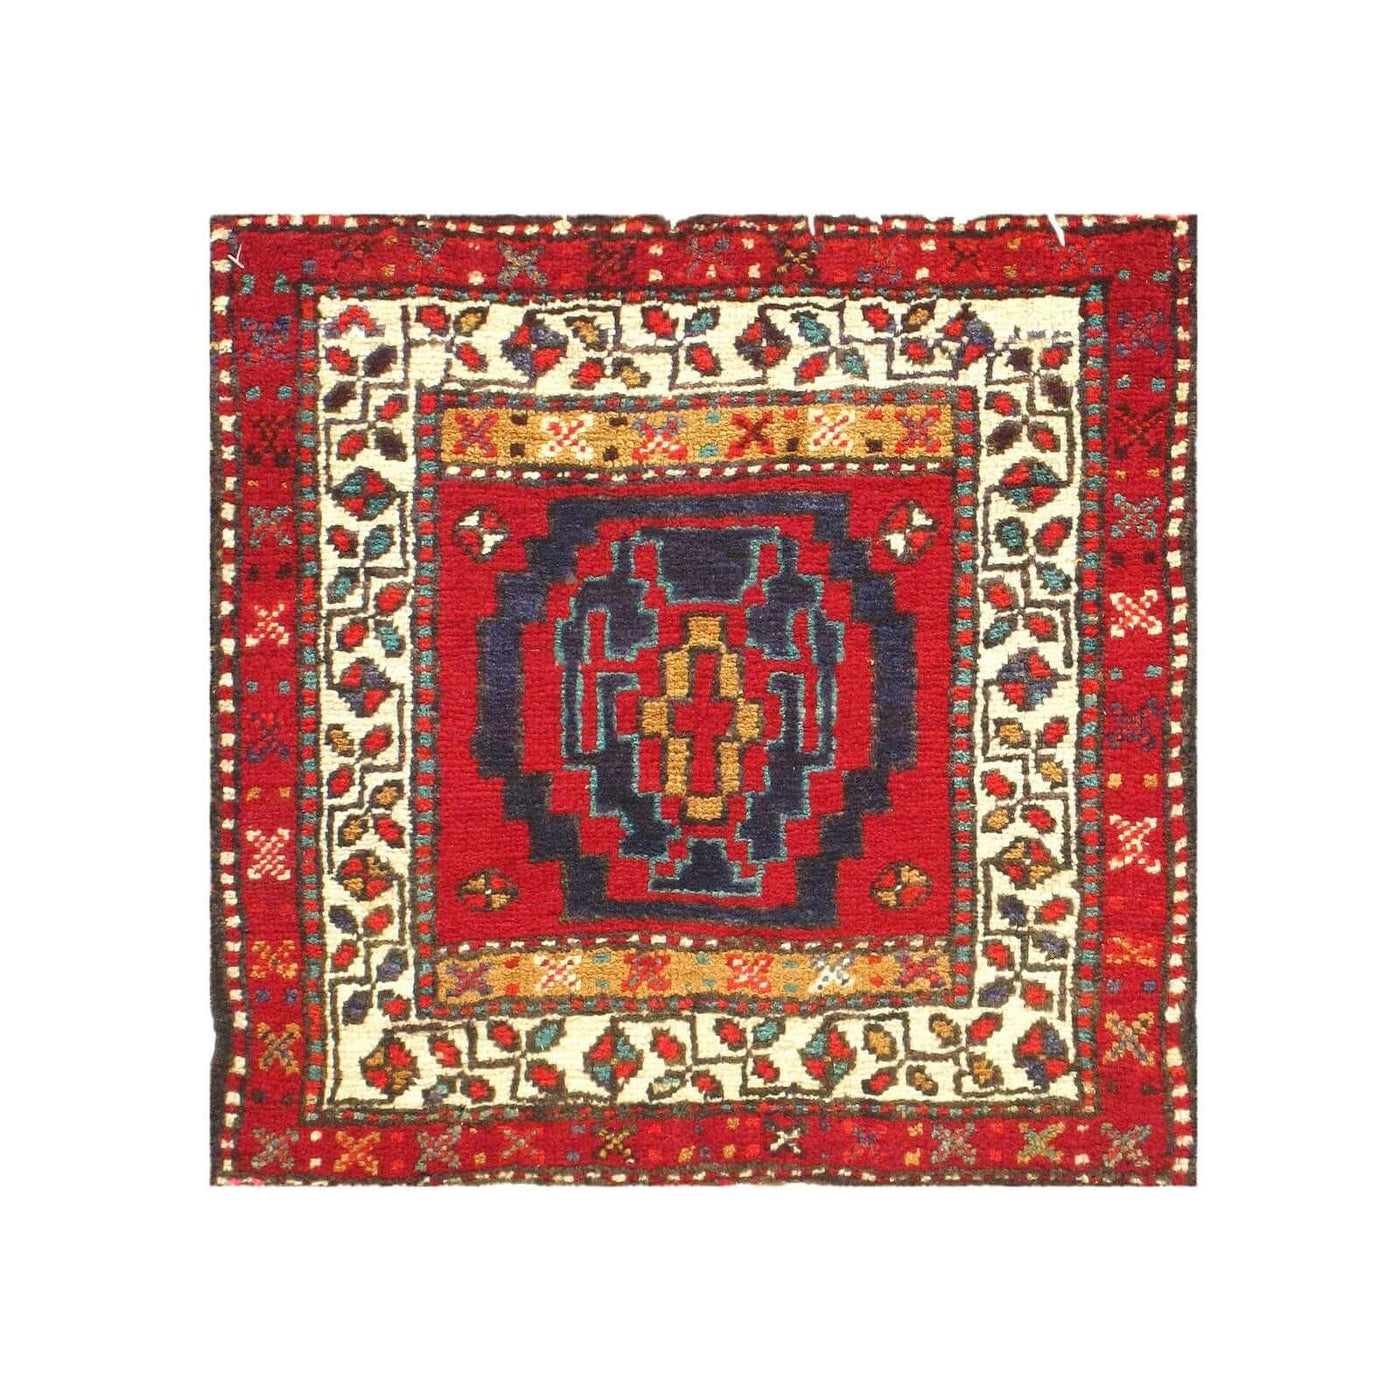 Canvello 1950s Semi-Antique Blue Red Rug - 1'9" x 1'9"